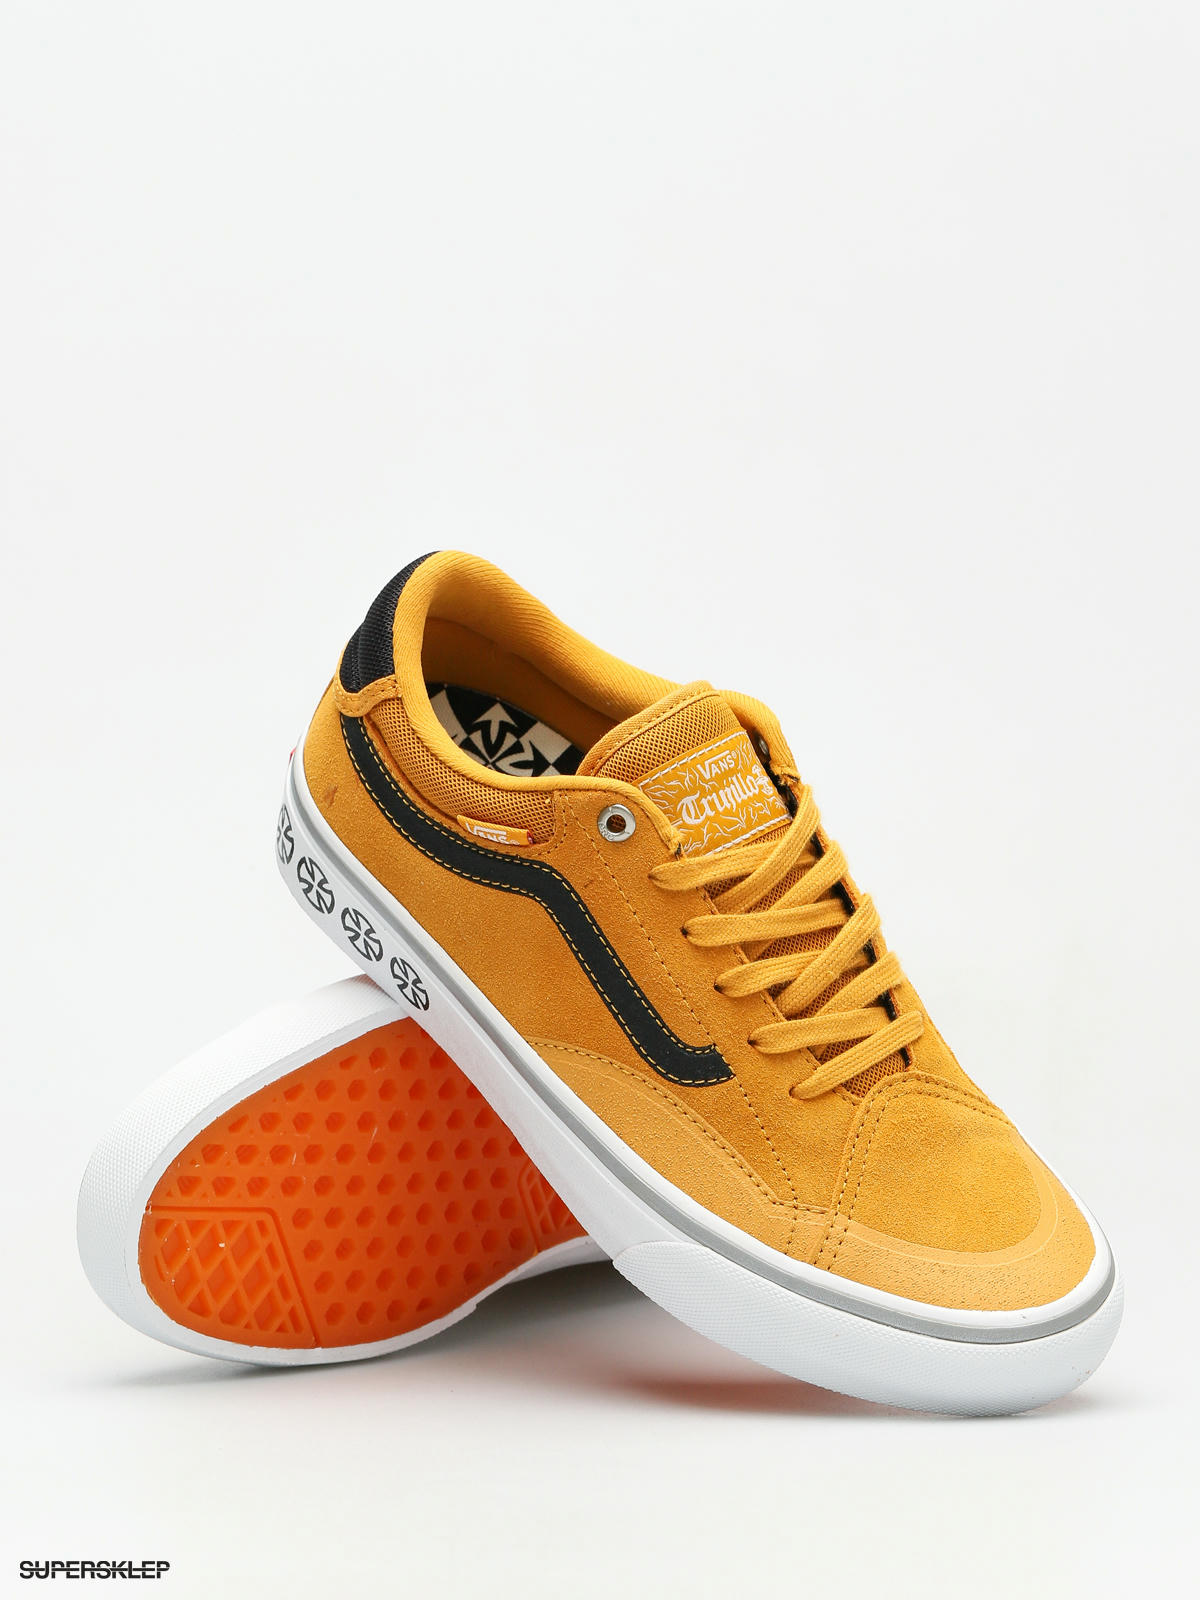 vans x independent tnt adv prototype sunflower & white skate shoes